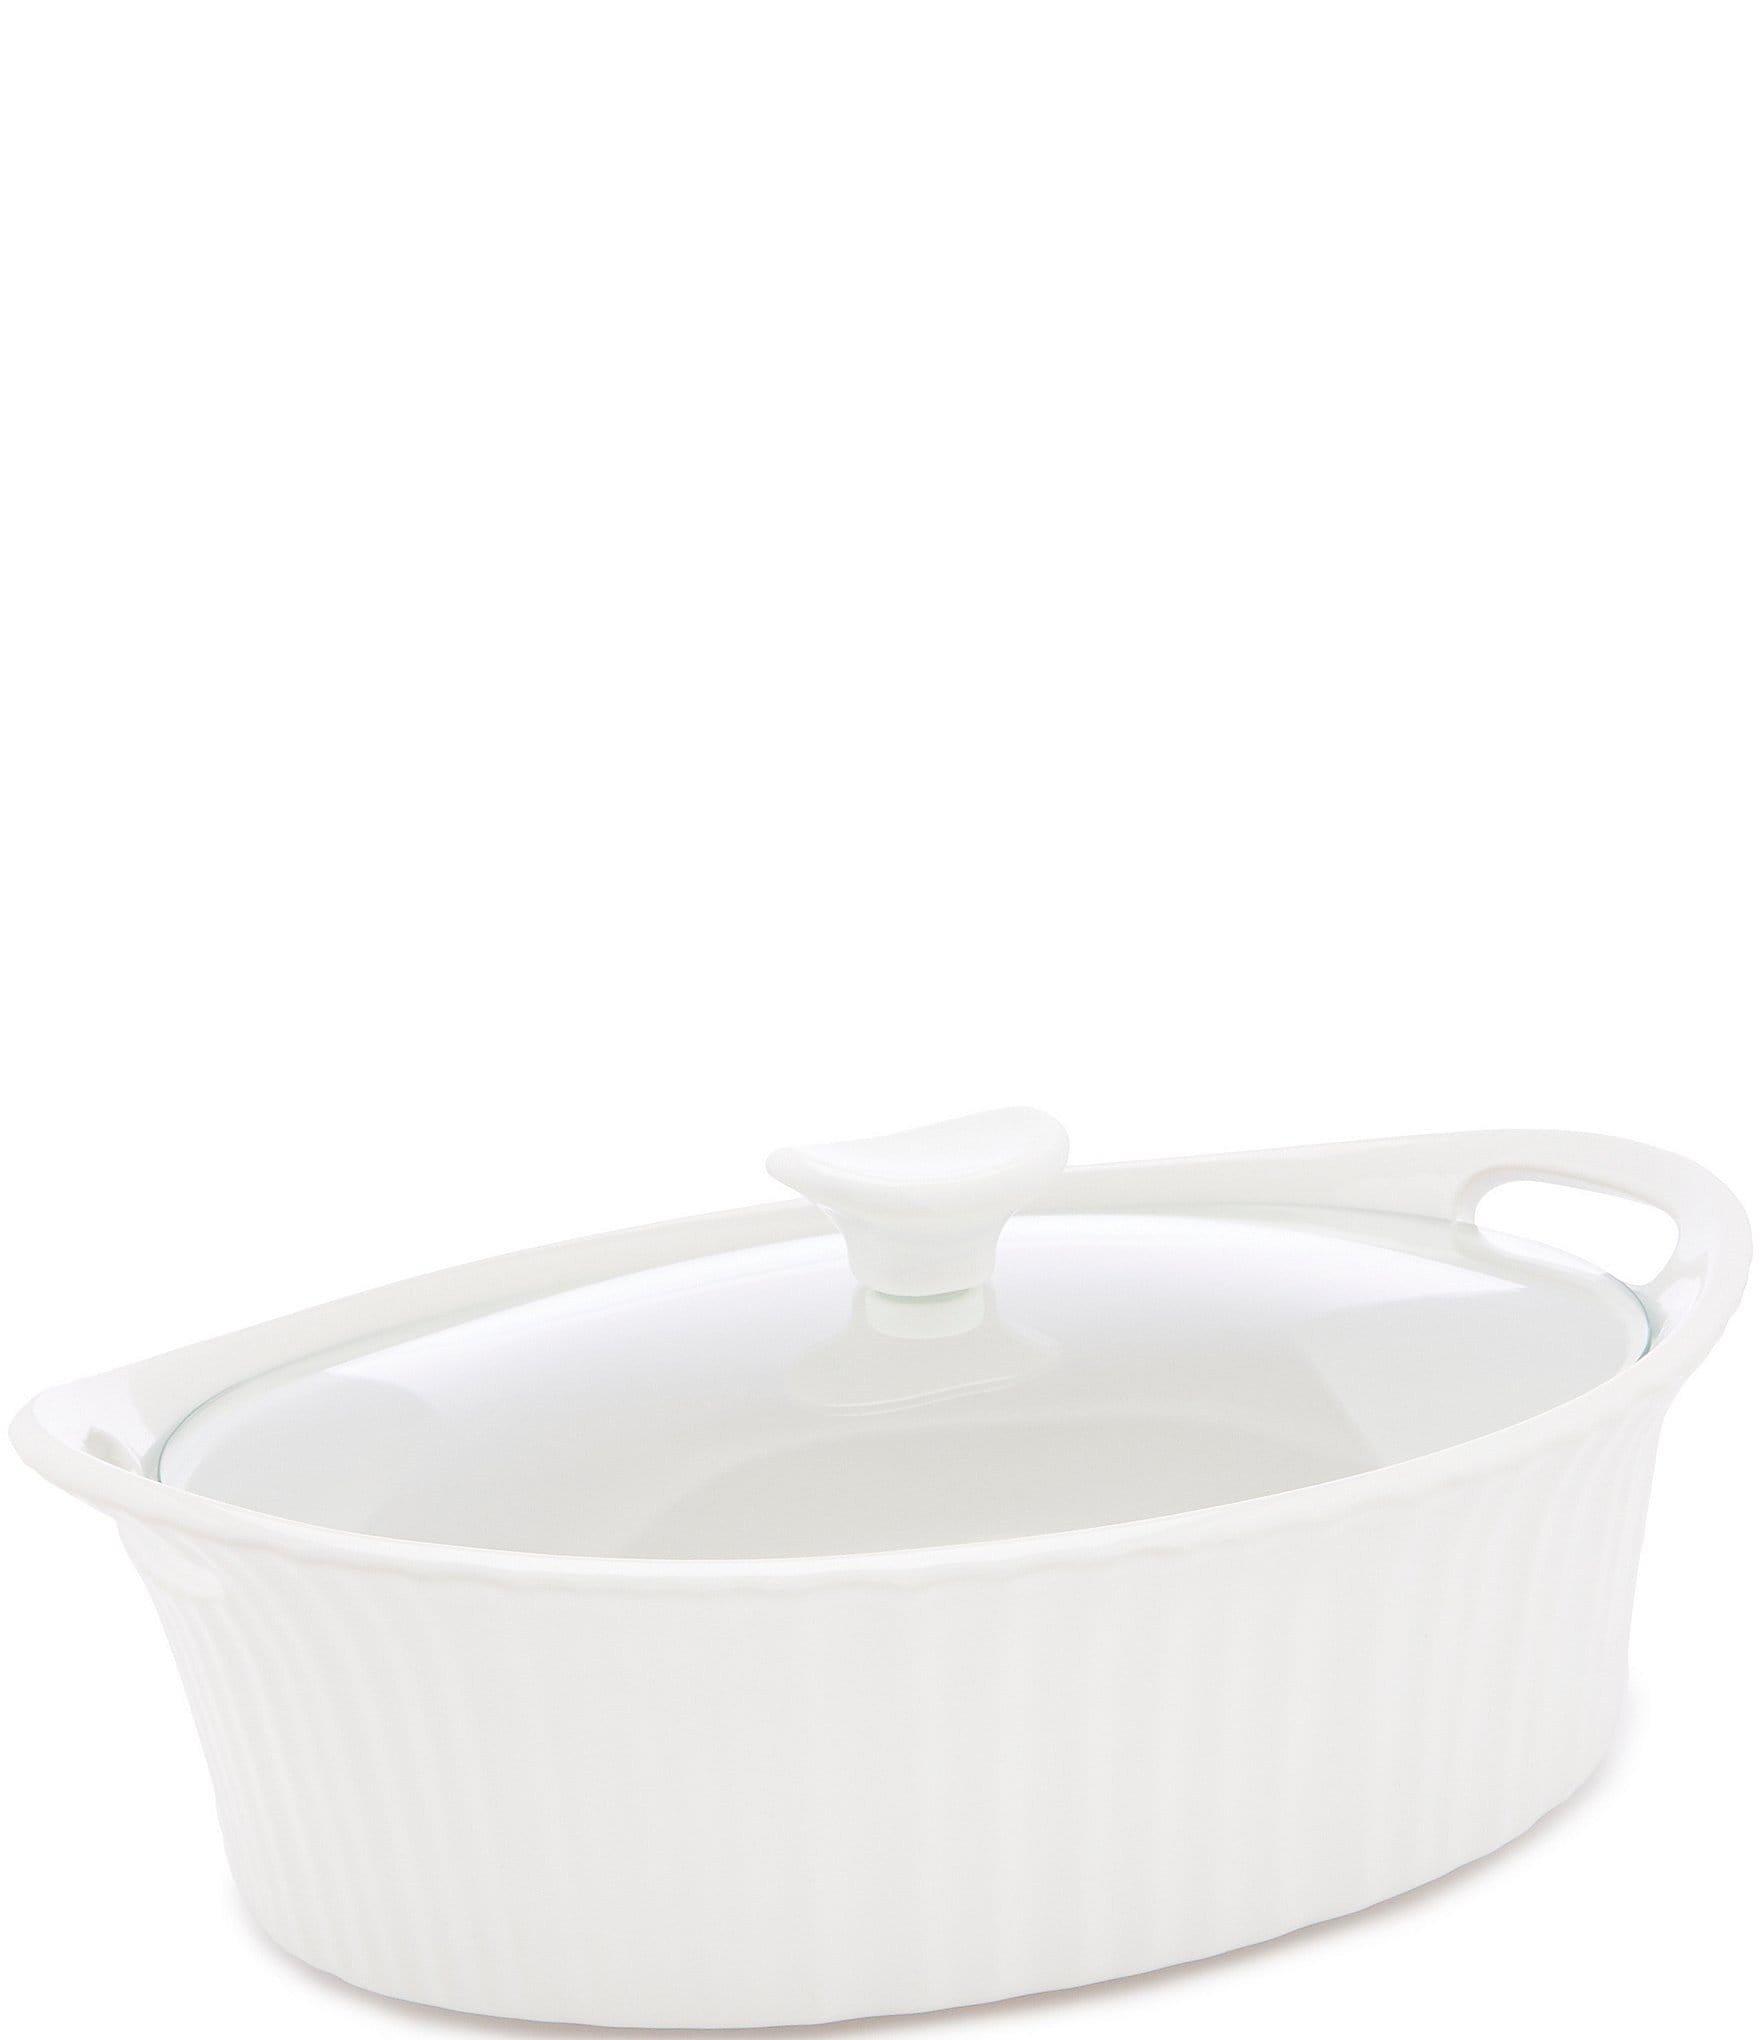 French White 1.5-quart Oval Casserole Dish with Lid